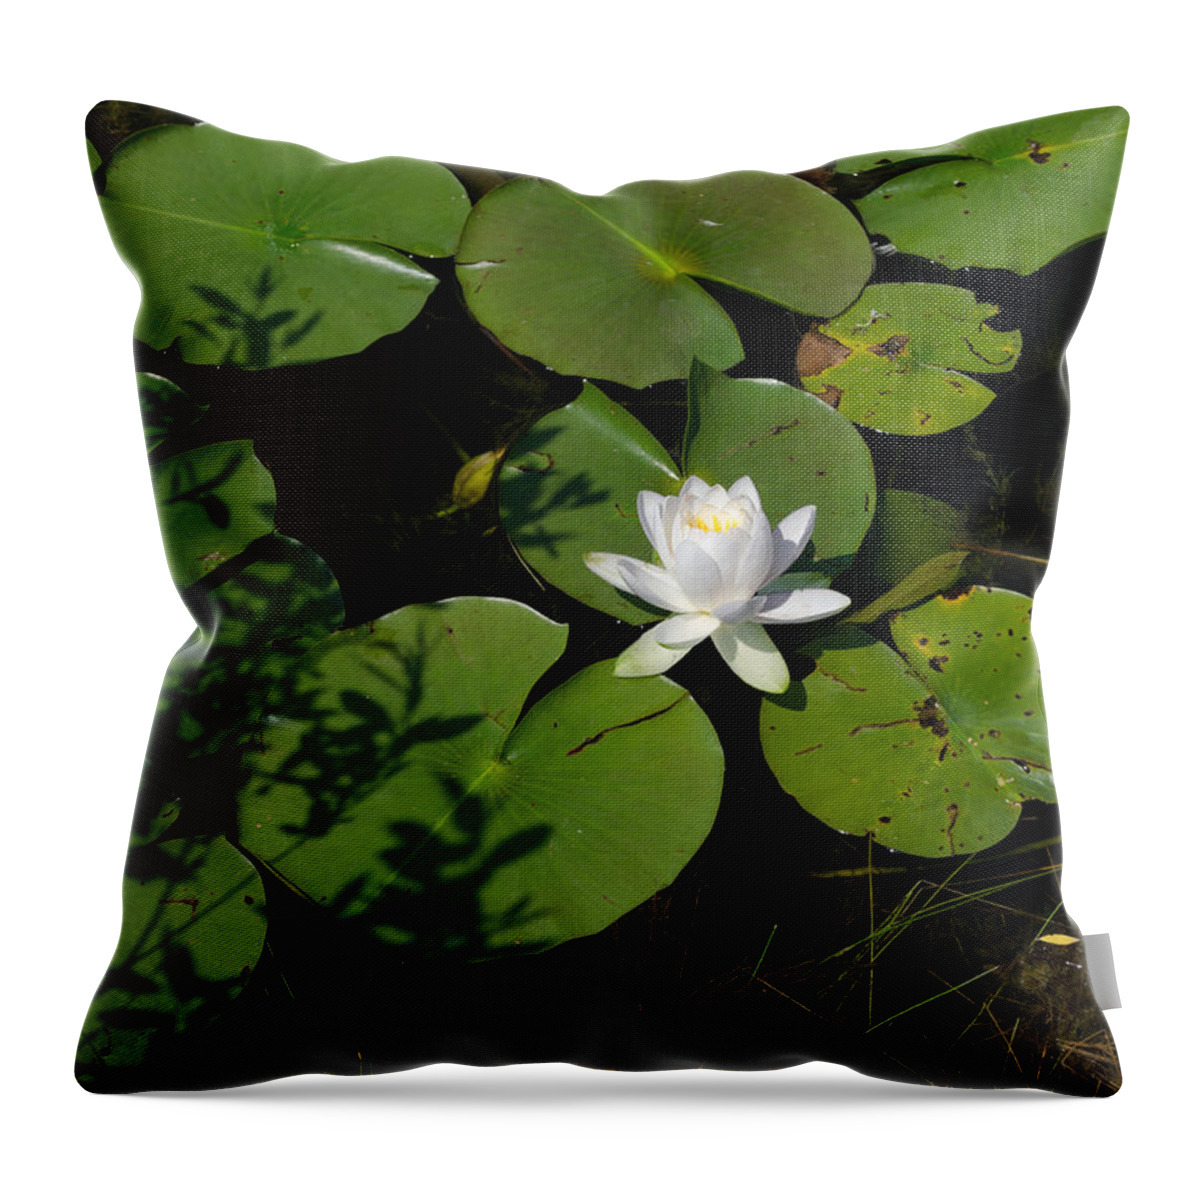 Water Lily Throw Pillow featuring the photograph Water Lily by Jim Shackett